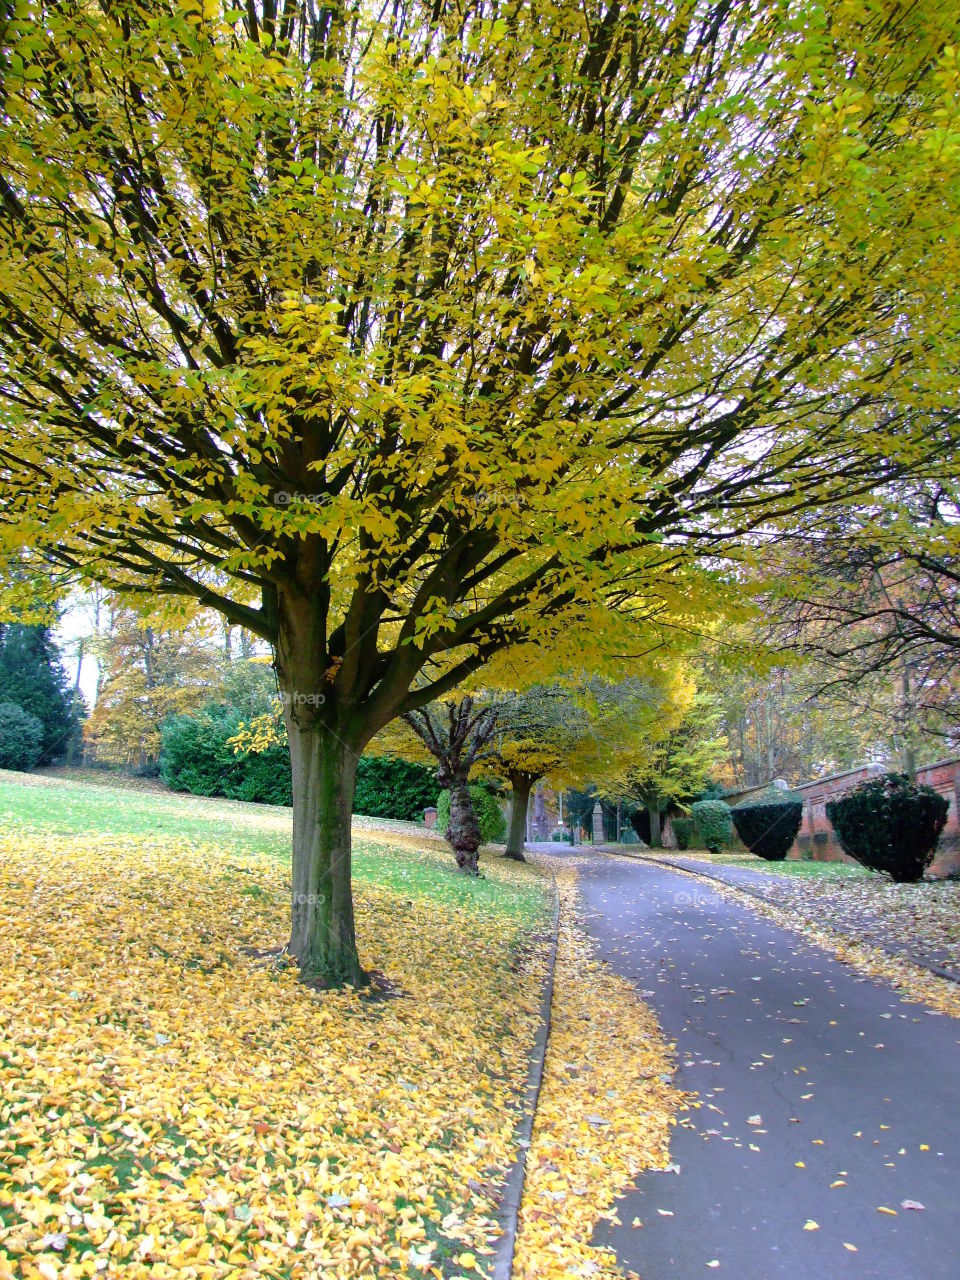 Yellow tree with its leaves on the ground